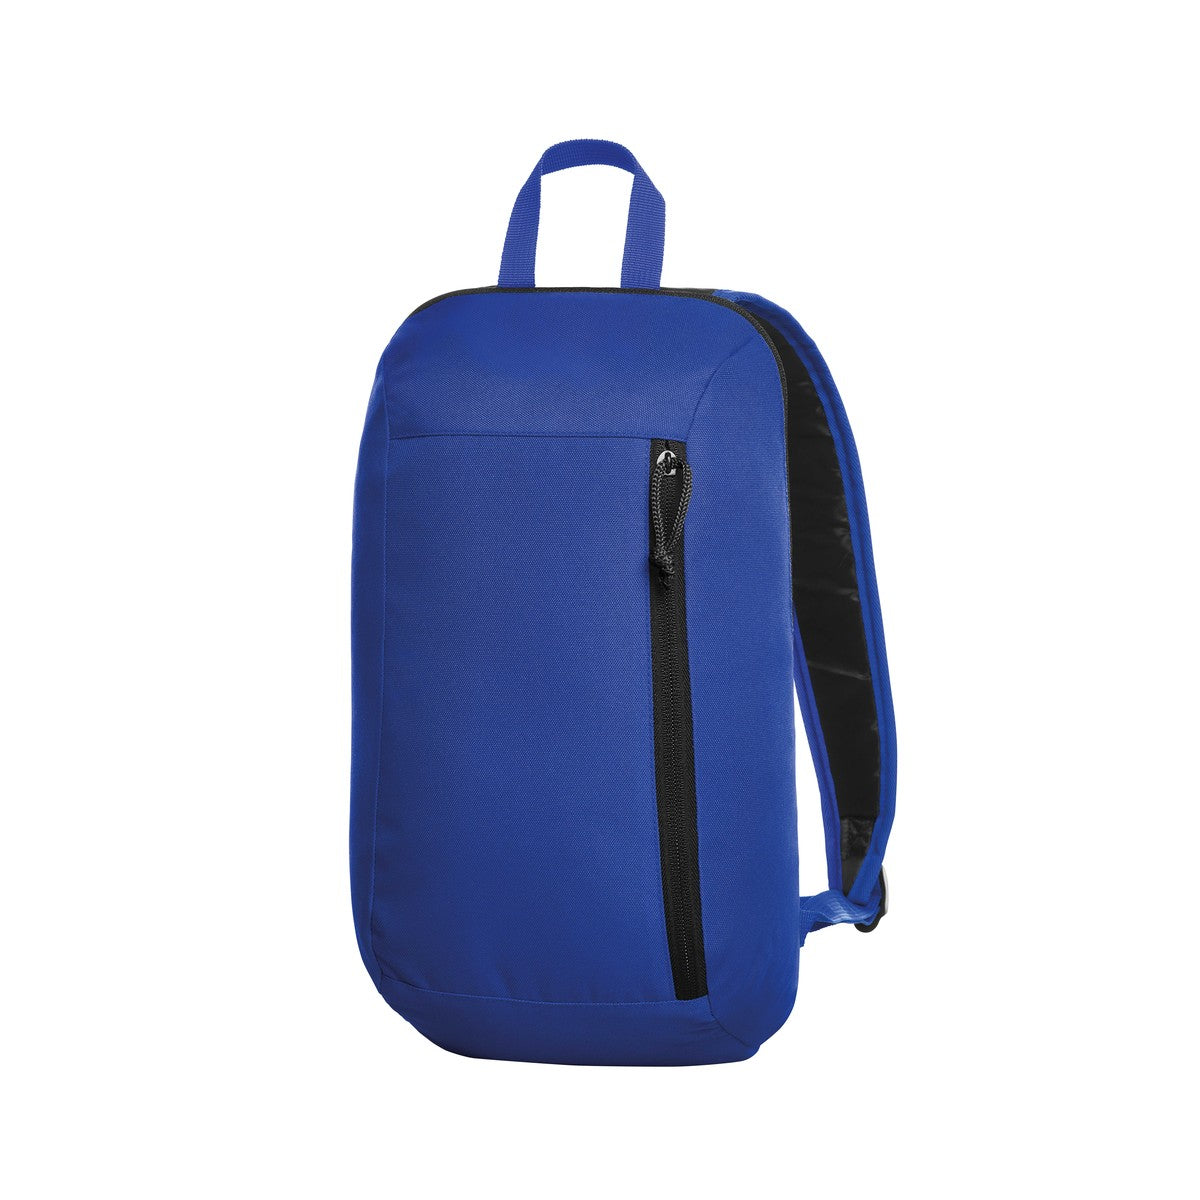 FLOW Backpack - 2 Pezzi